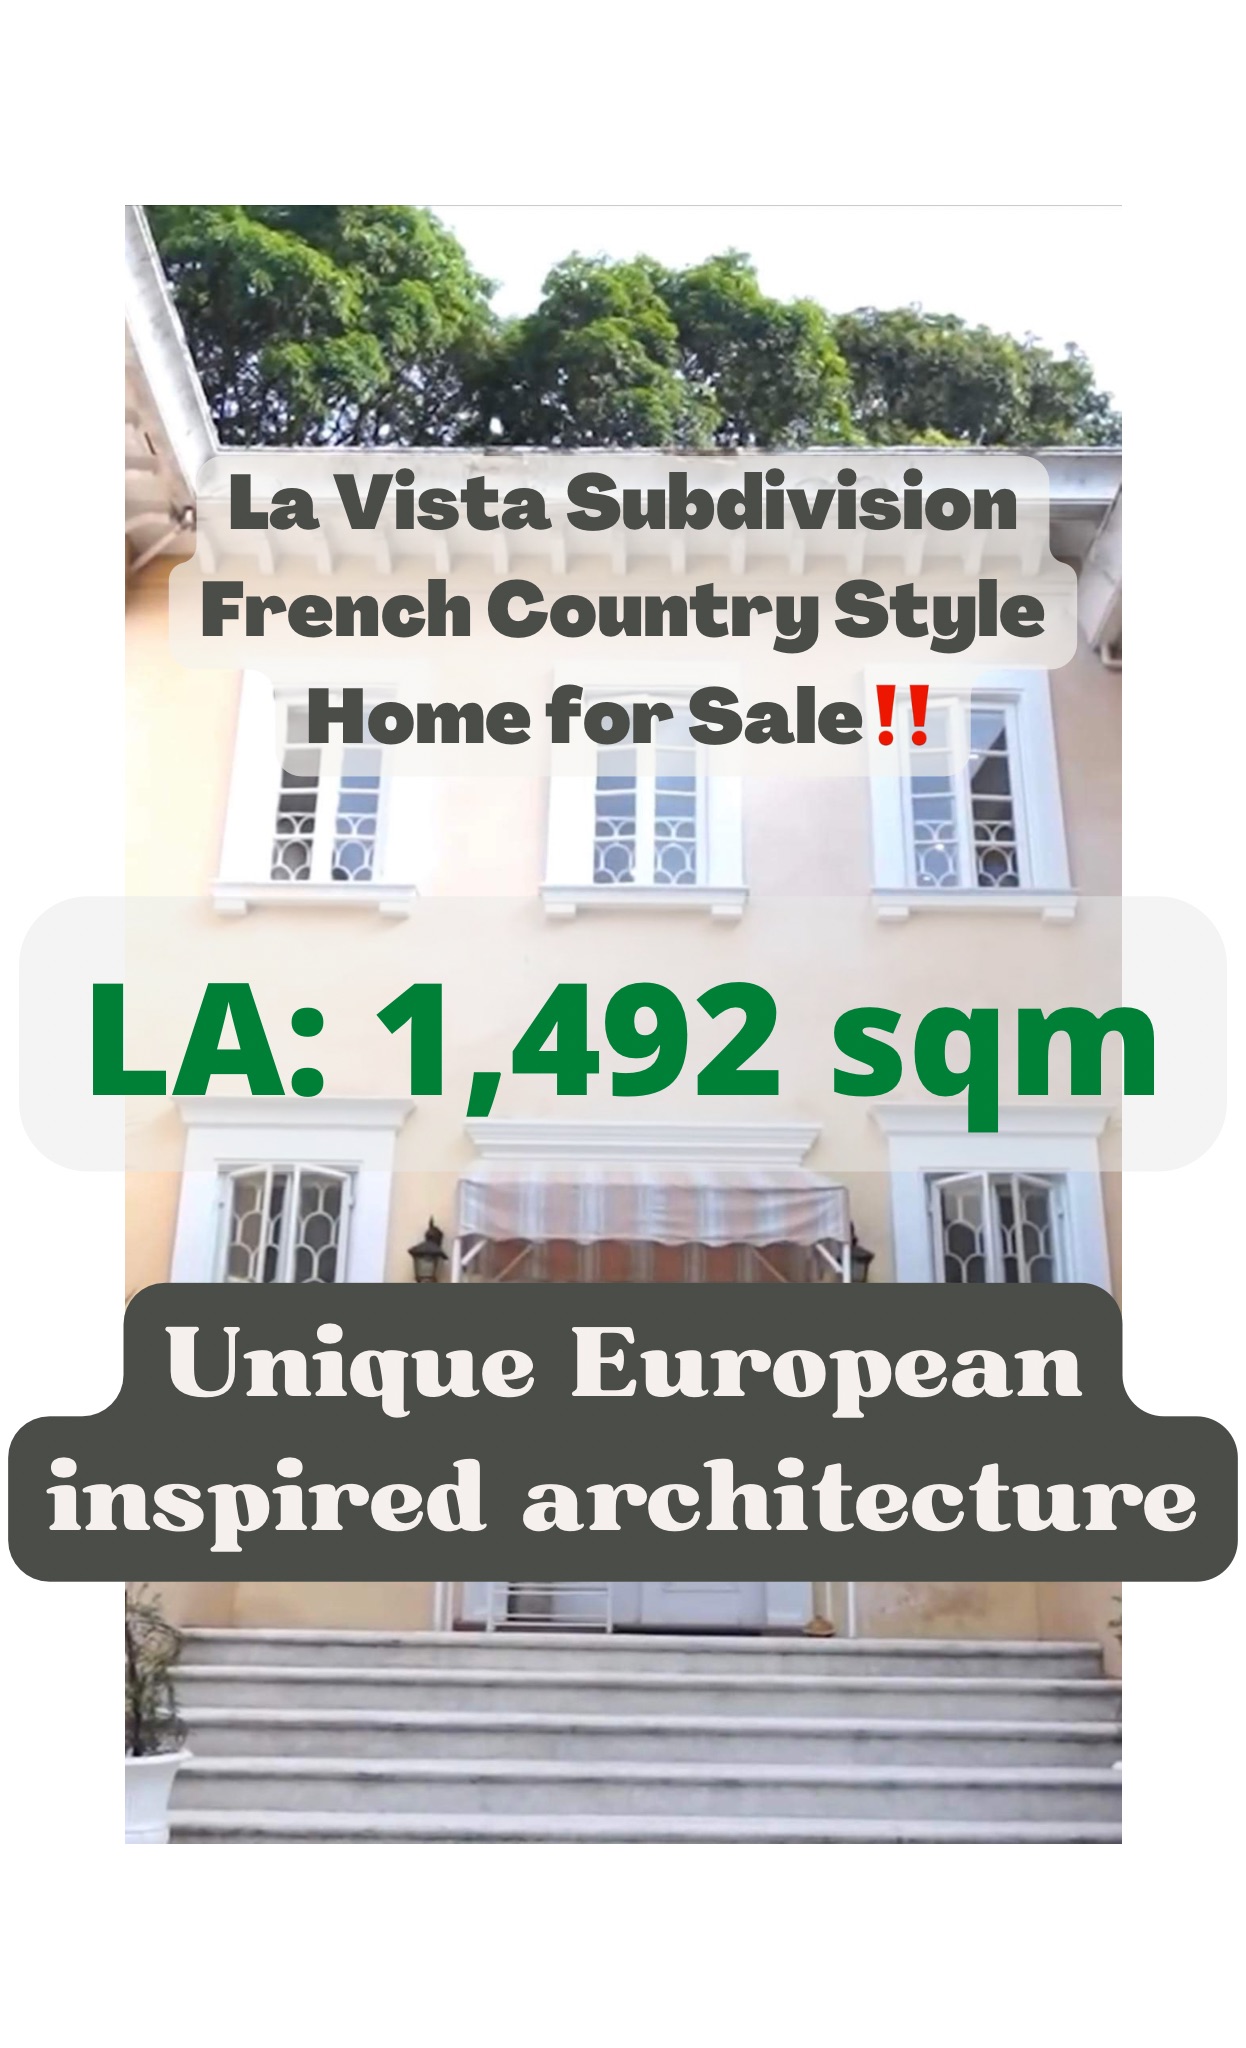 La Vista Subdivision French Country Style Home for Sale‼️